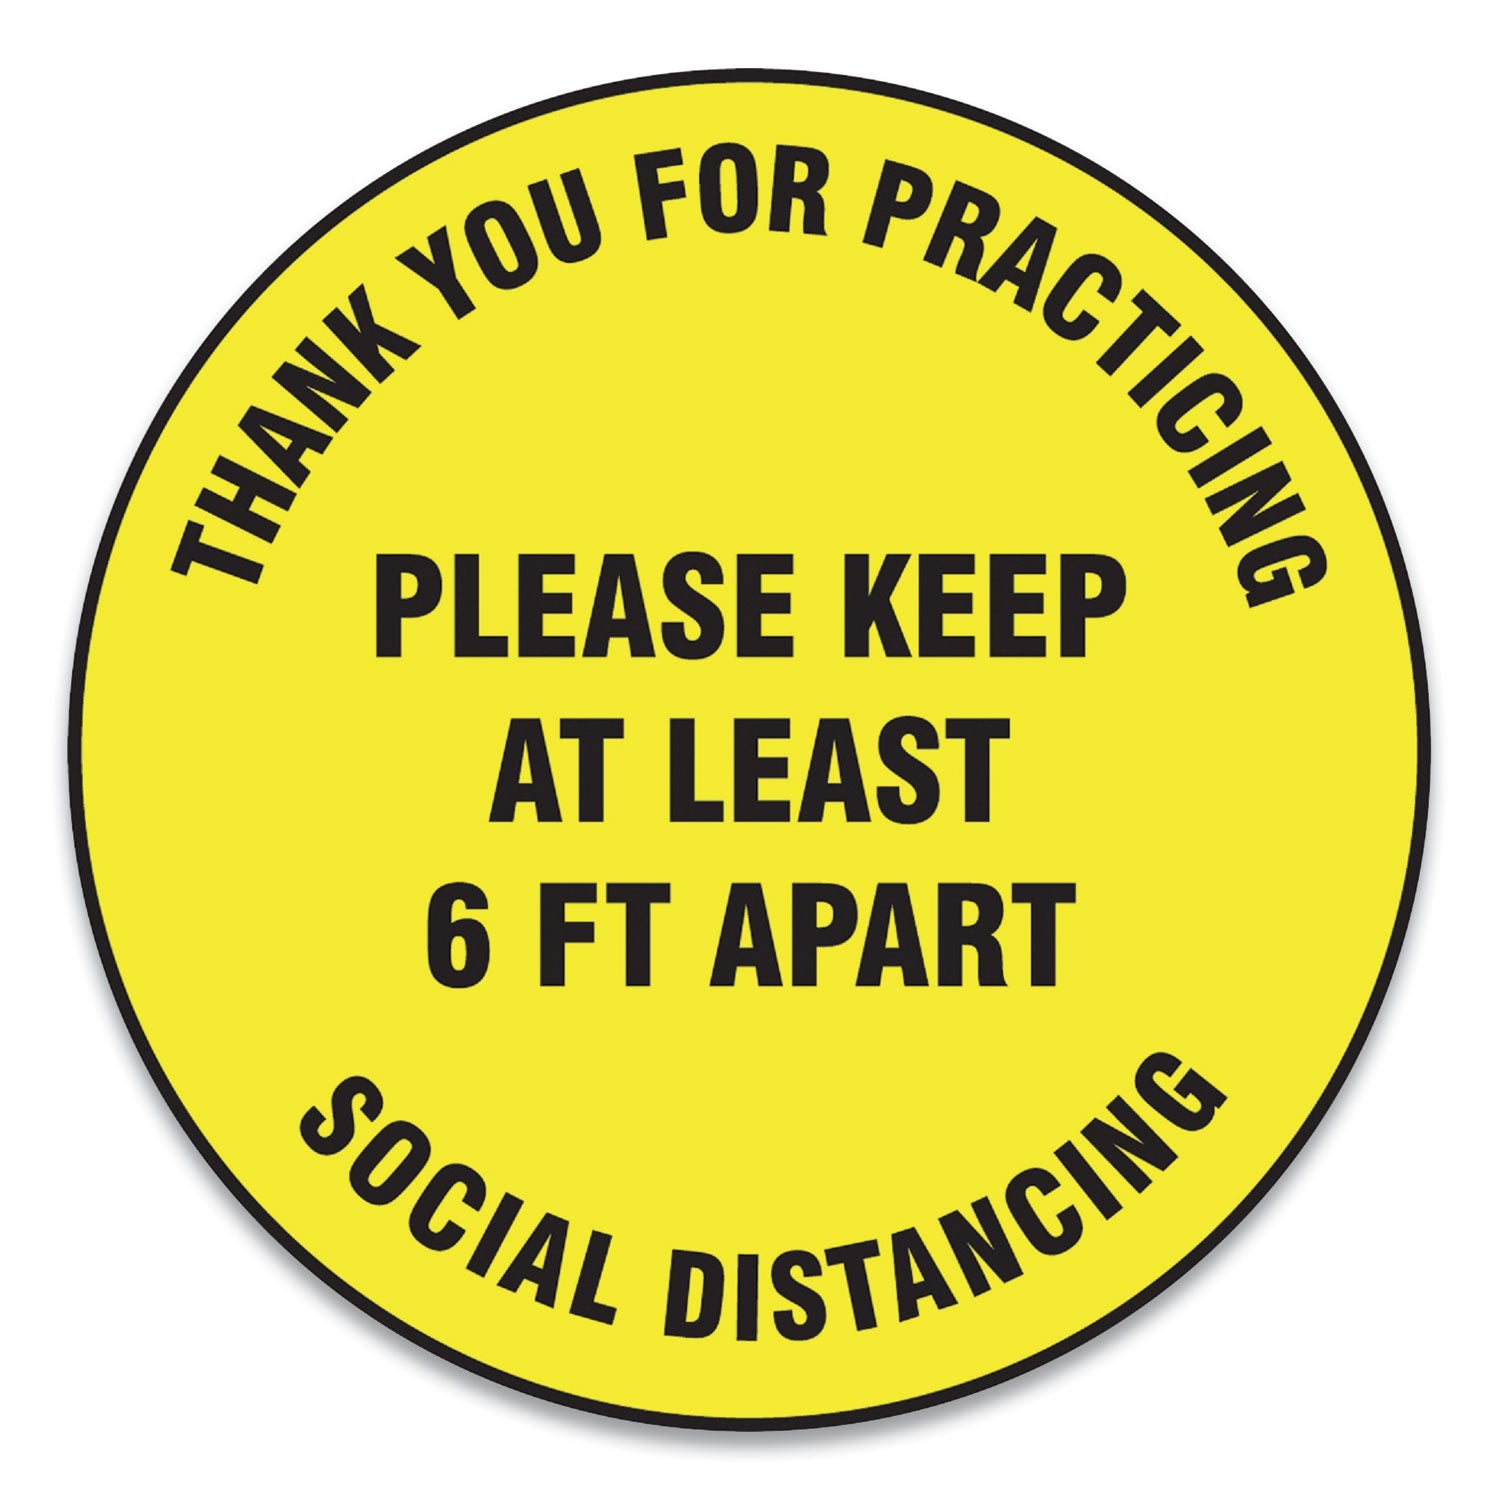 slip-gard-floor-signs-12-circlethank-you-for-practicing-social-distancing-please-keep-at-least-6-ft-apart-yellow-25-pk_gn1mfs426esp - 1